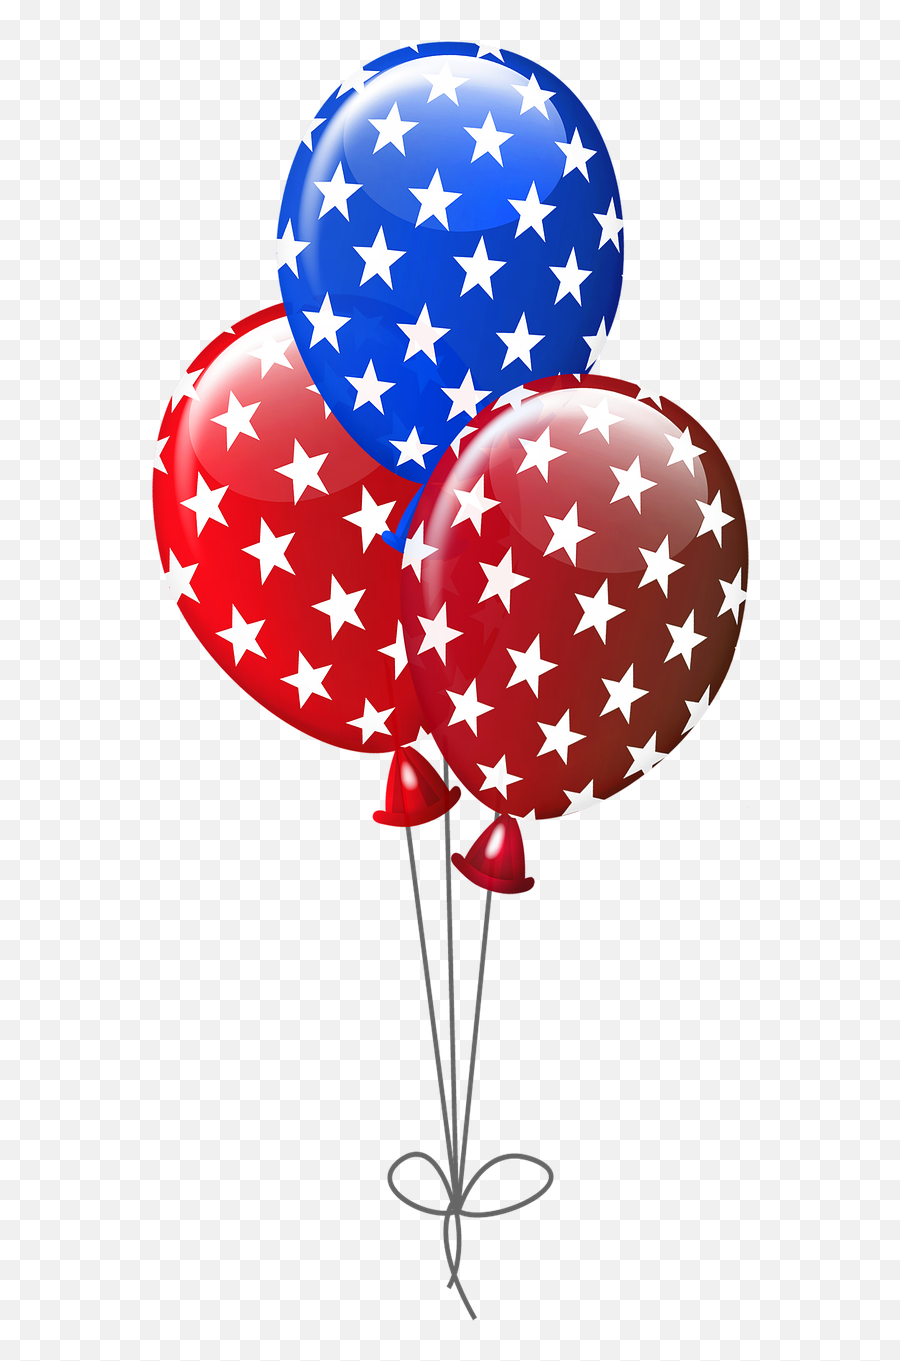 Balloons Blue Streamers Colorful Sky - Free Red White And Blue Balloons Png,White Balloons Png